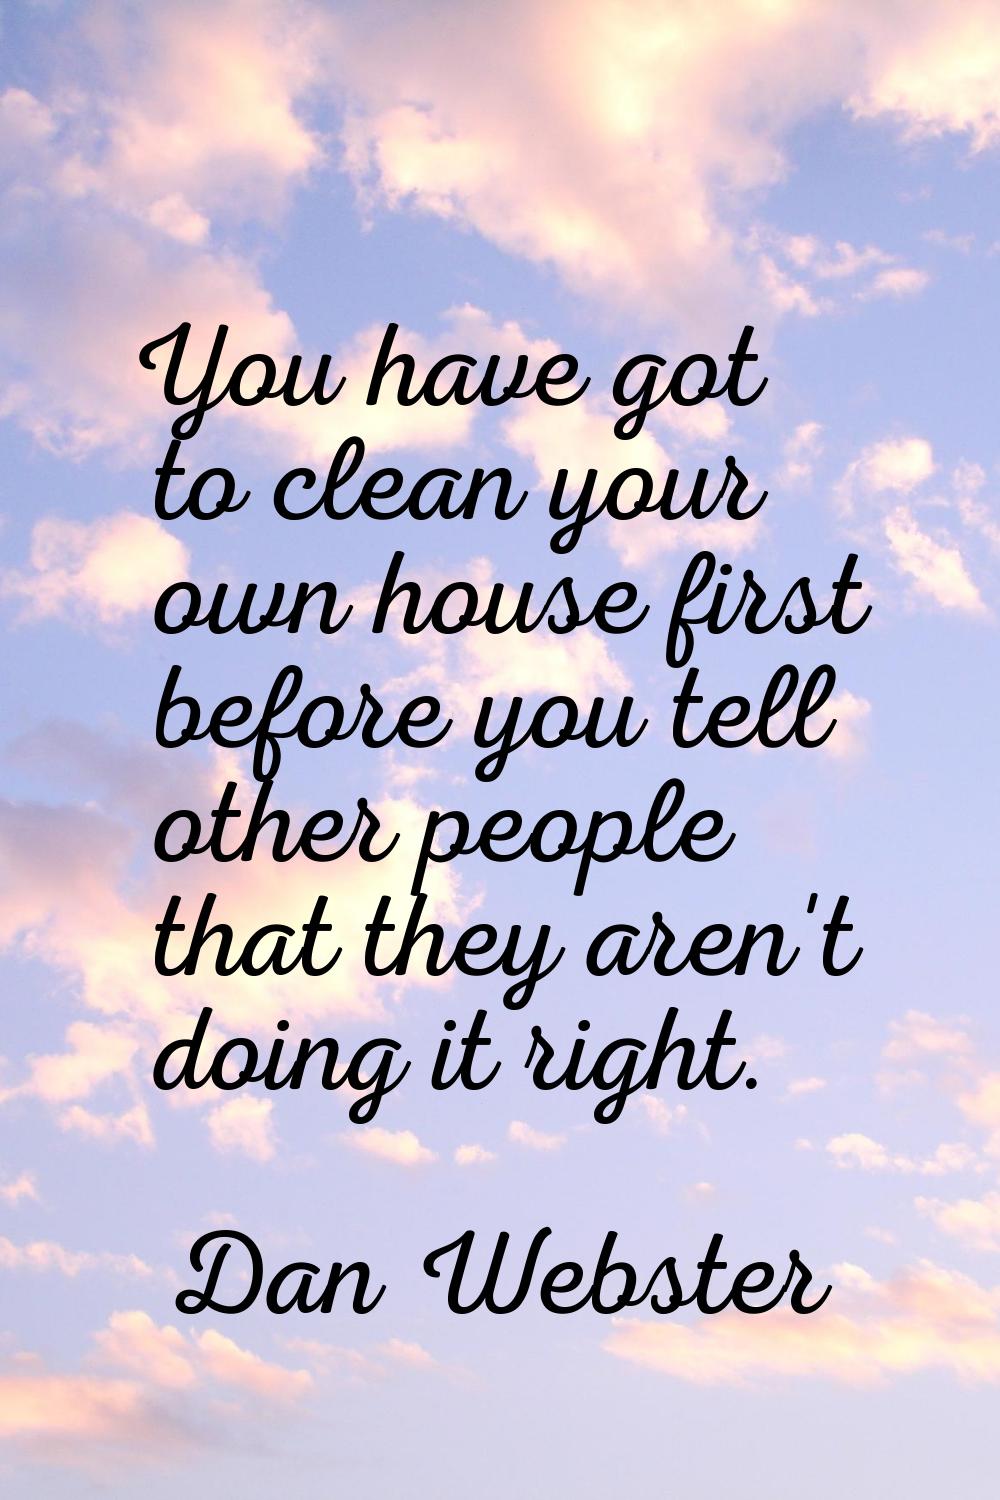 You have got to clean your own house first before you tell other people that they aren't doing it r